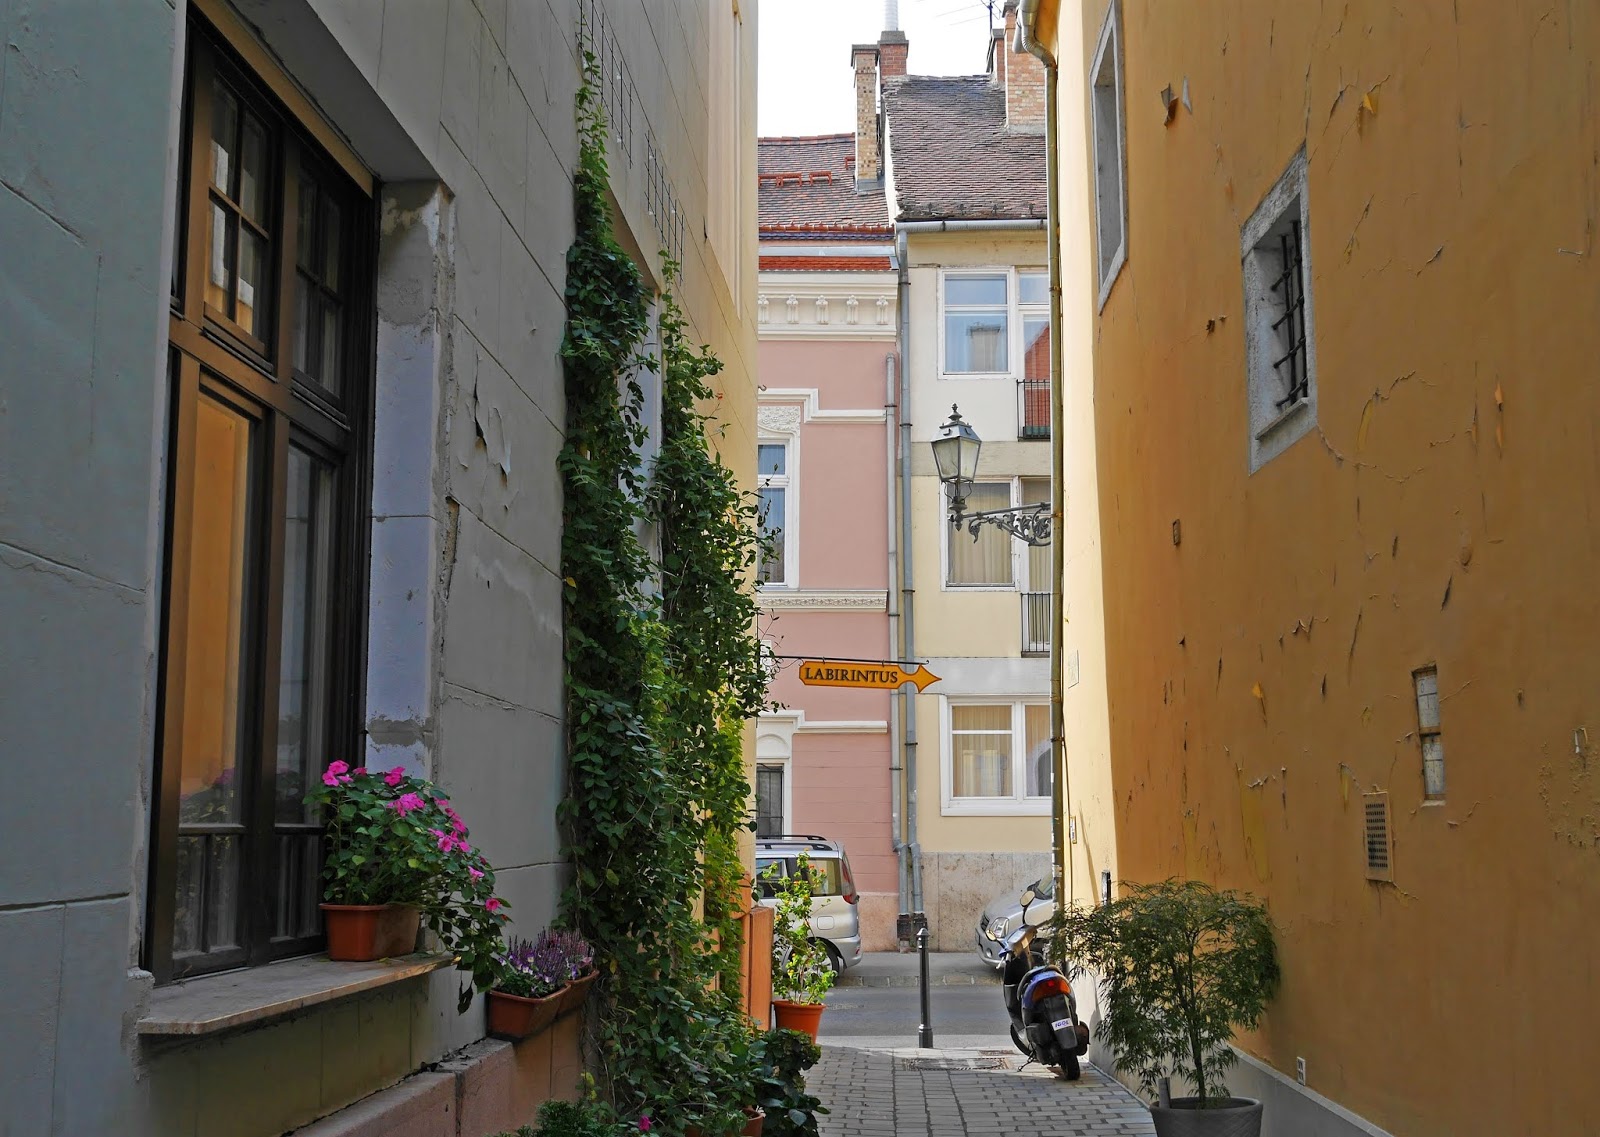 Pretty side streets on the Buda side of the city, Budapest